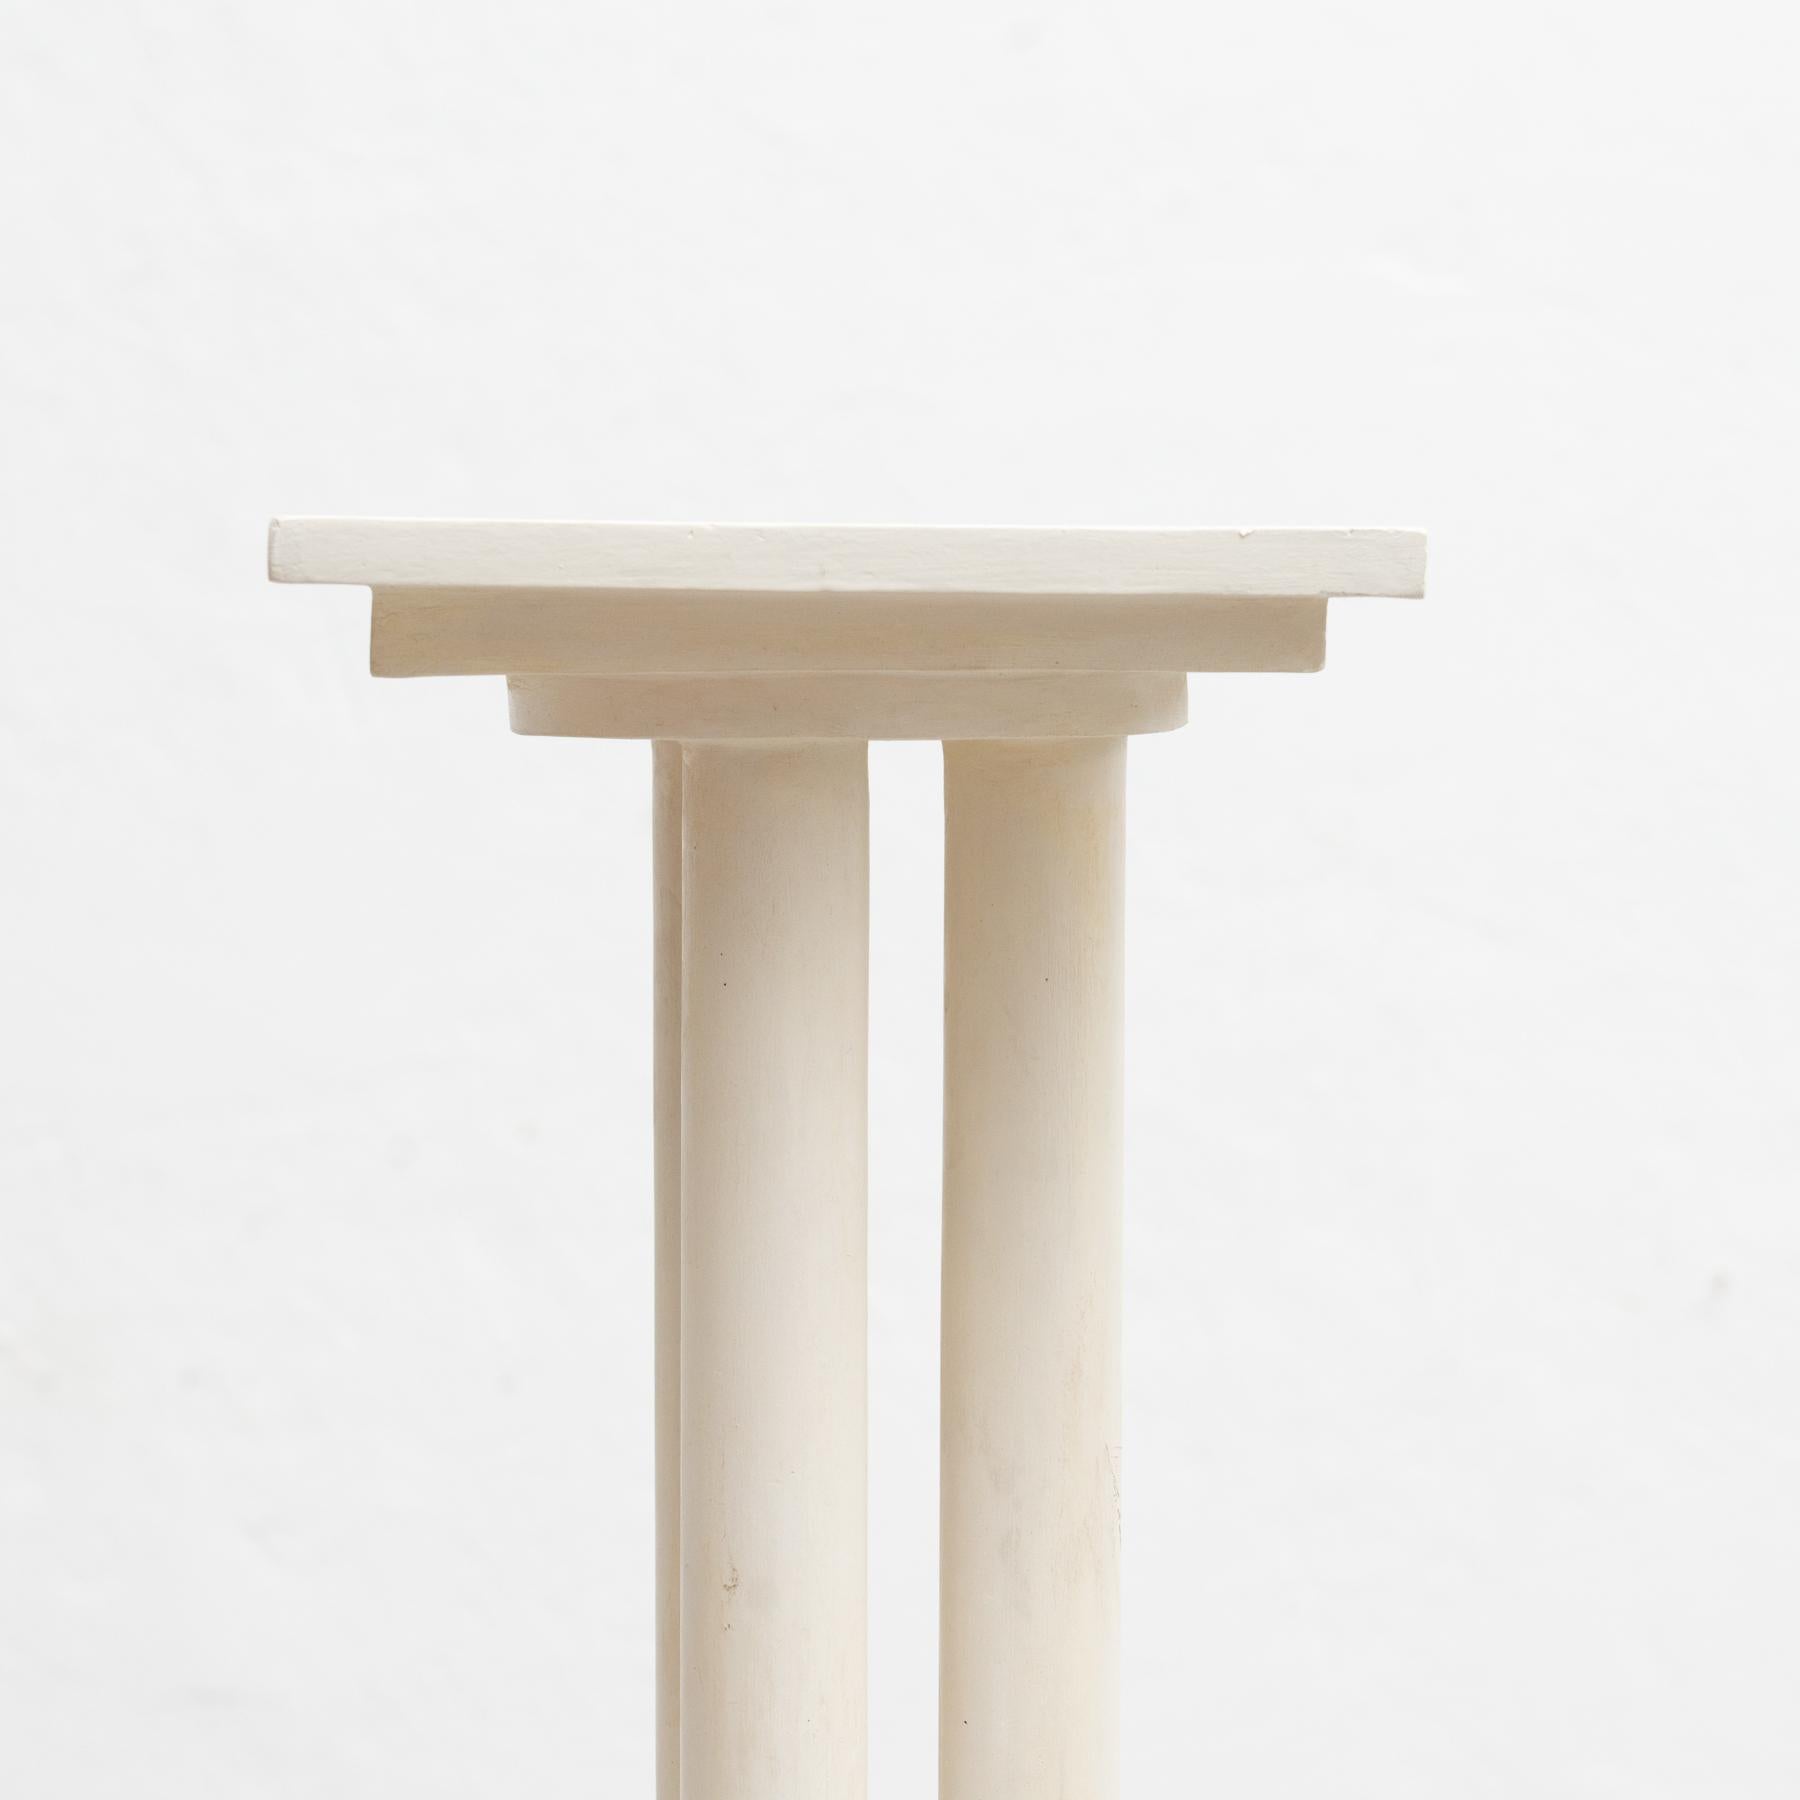 Plaster Antique Column Stand, circa 1950 In Good Condition For Sale In Barcelona, Barcelona